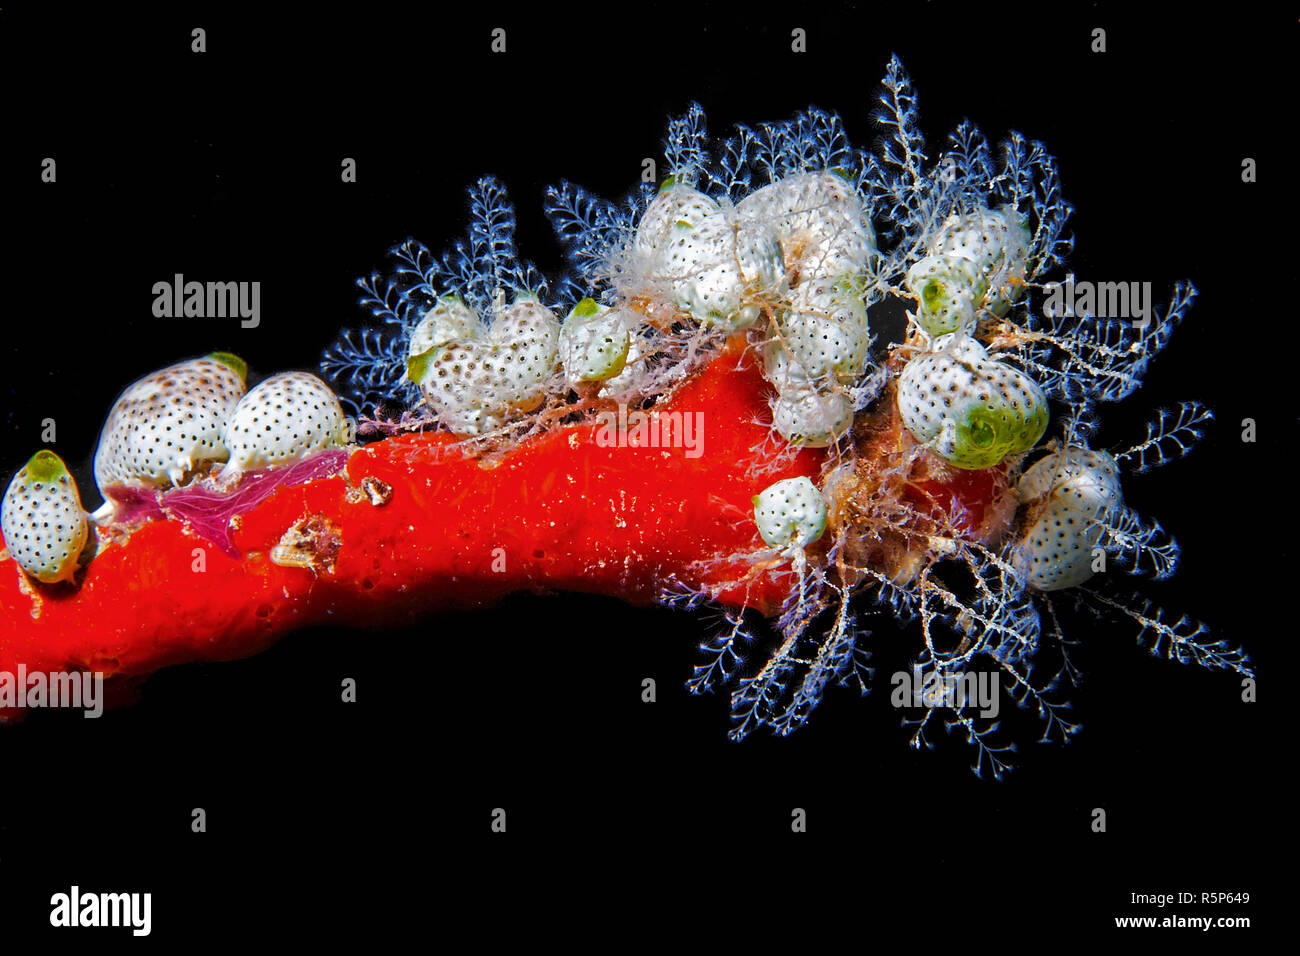 Robust sea squirt (Atriolum robustum) and feather hydroids, on a red sponch, Ari Atoll, Maldive islands Stock Photo